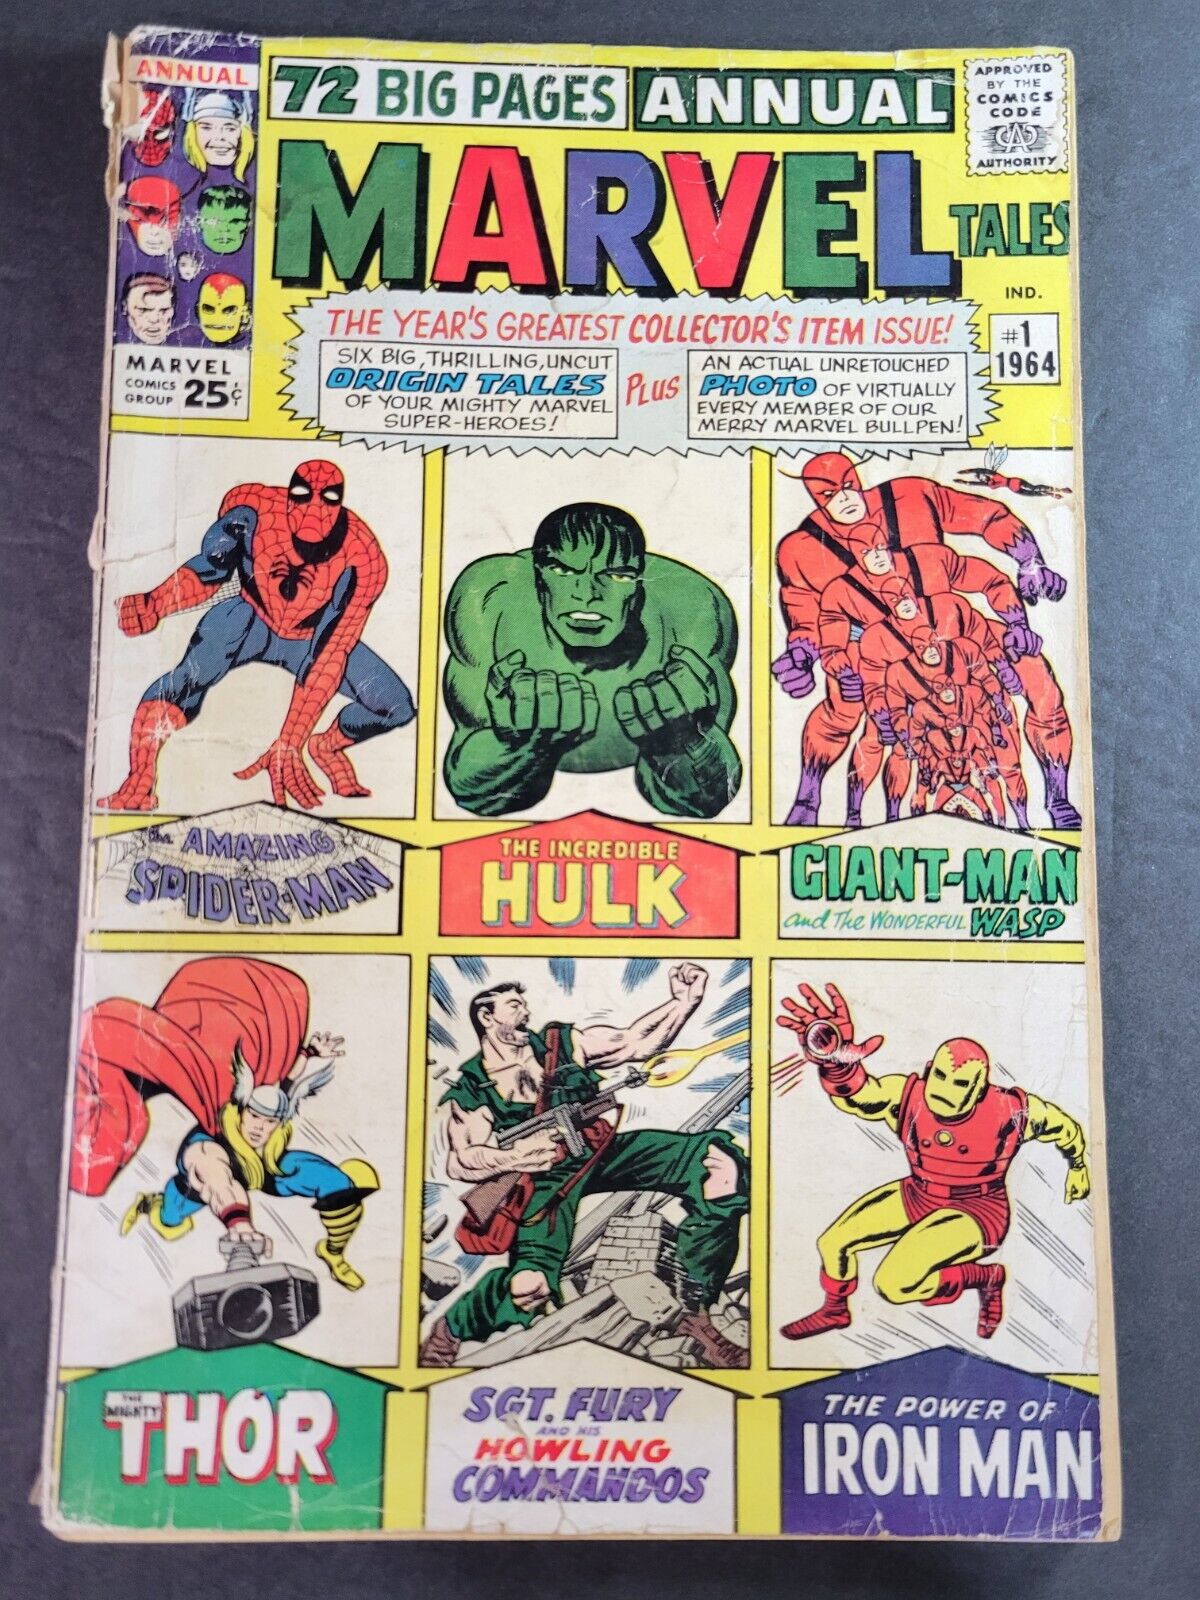 Marvel Tales #1 Annual 1 1964 Amazing Spider-Man Incredible Hulk Thor Low Grade